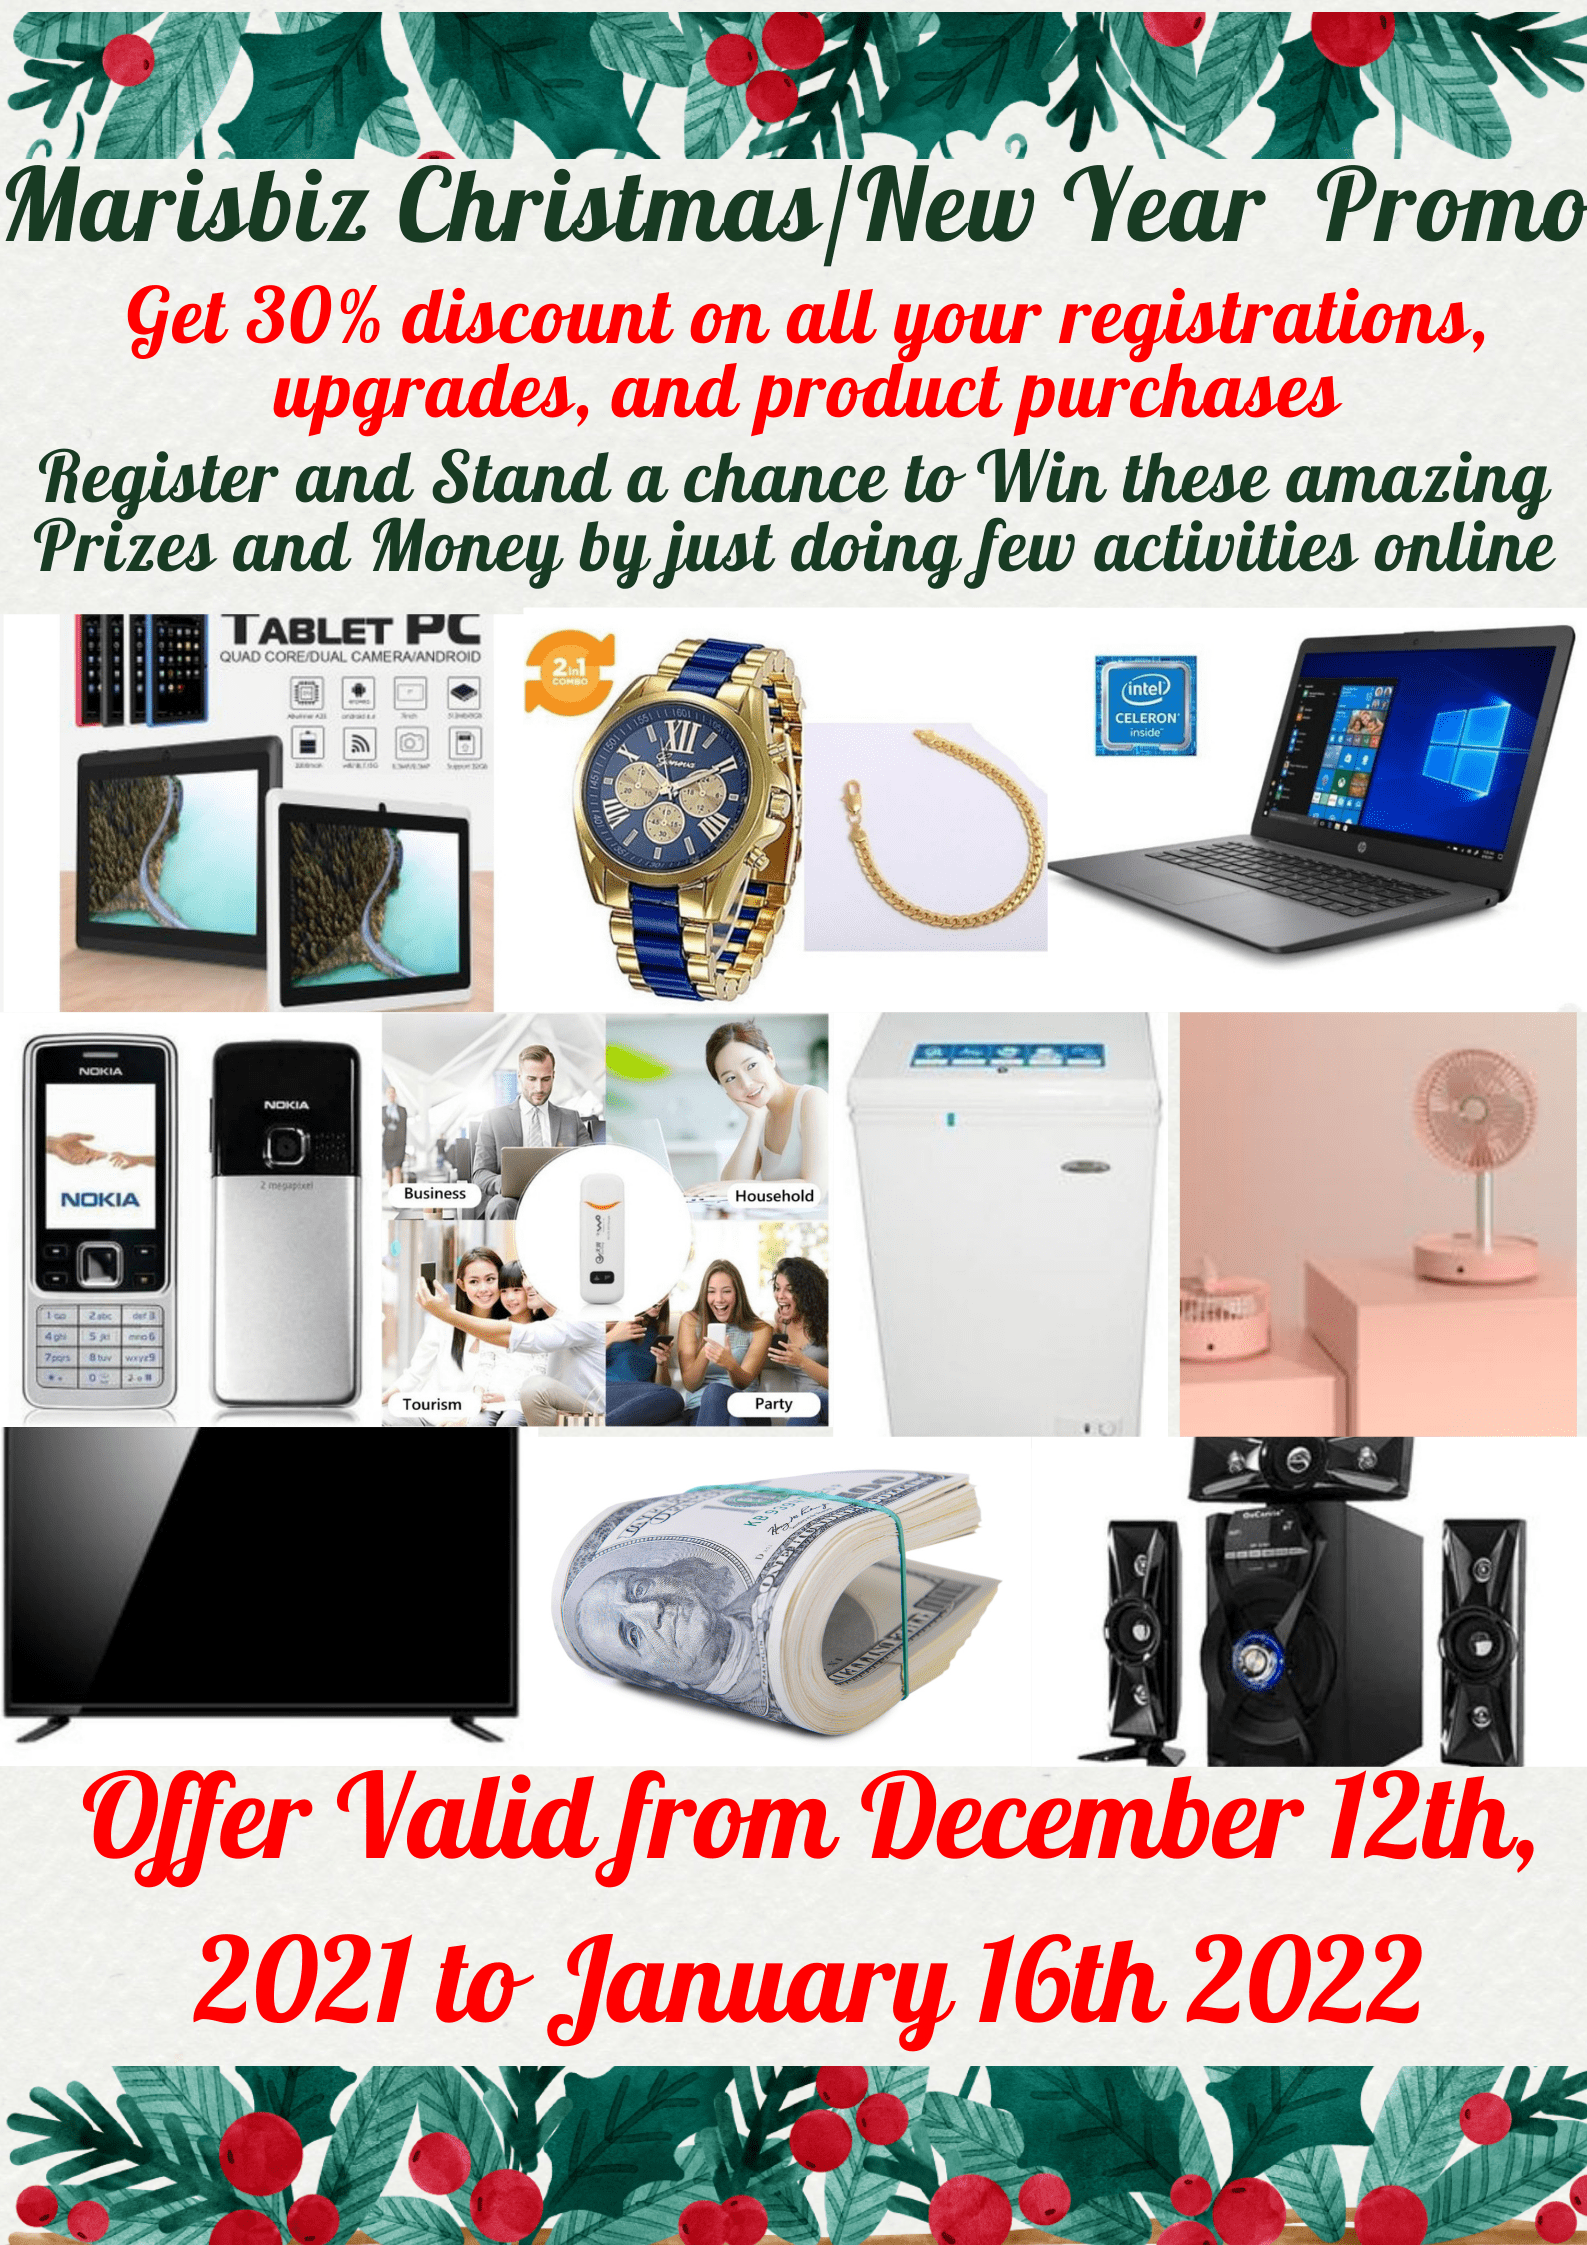 You are currently viewing MARISBIZ CHRISTMAS/NEW YEAR PROMO AND GIVEAWAY